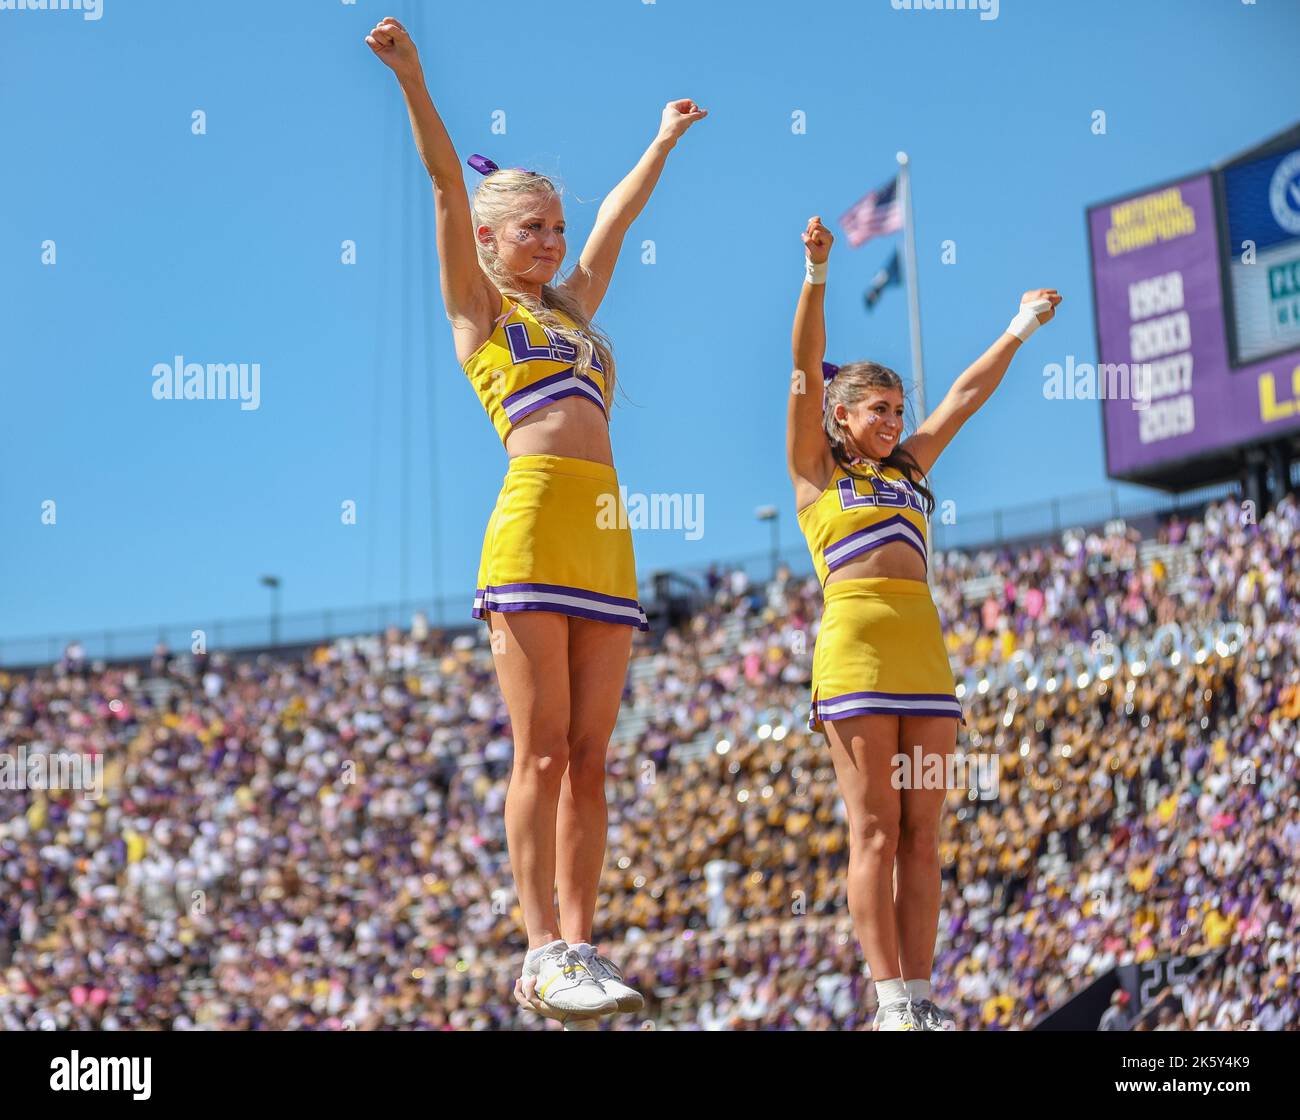 Baton Rouge, LA, USA. 8th Oct, 2022. The LSU cheerleaders do a coupie contest on the sidelines during the NCAA football game between the Tennessee Volunteers and LSU Tigers at Tiger Stadium in Baton Rouge, LA. Kyle Okita/CSM/Alamy Live News Stock Photo